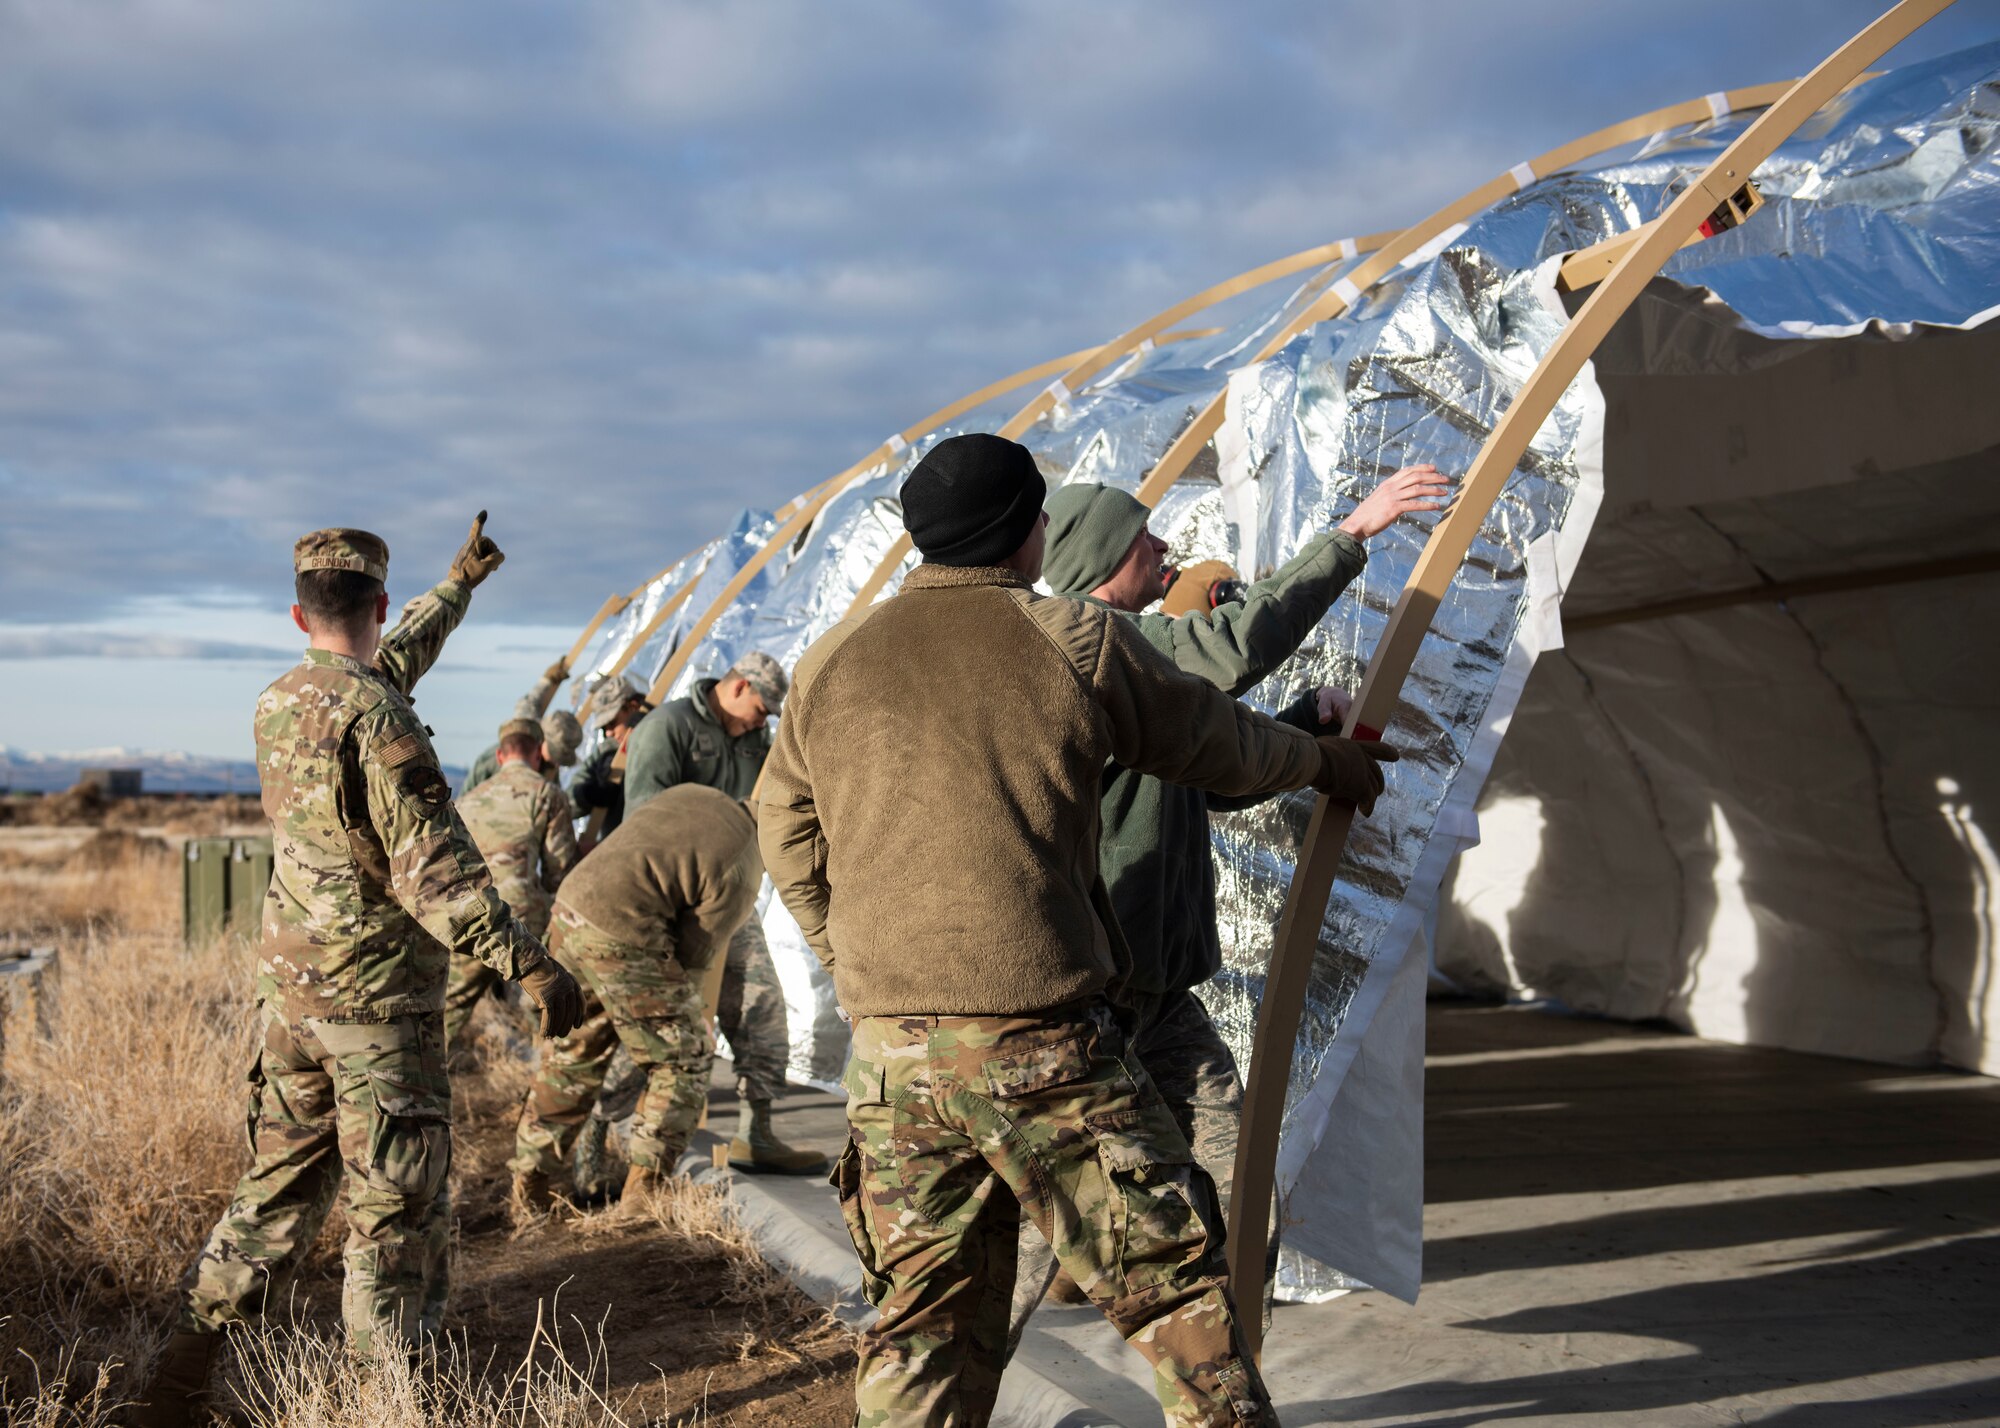 Airman from the 366th Civil Engineer Squadron use teamwork to construct a tactical shelter during the Base Emergency Engineer Force training, Jan. 23, 2020, at Mountain Home Air Force Base, Idaho. This training was conducted to equip Airman with skills from other career fields to enhance their readiness. (U.S. Air Force photo by Senior Airman Tyrell Hall